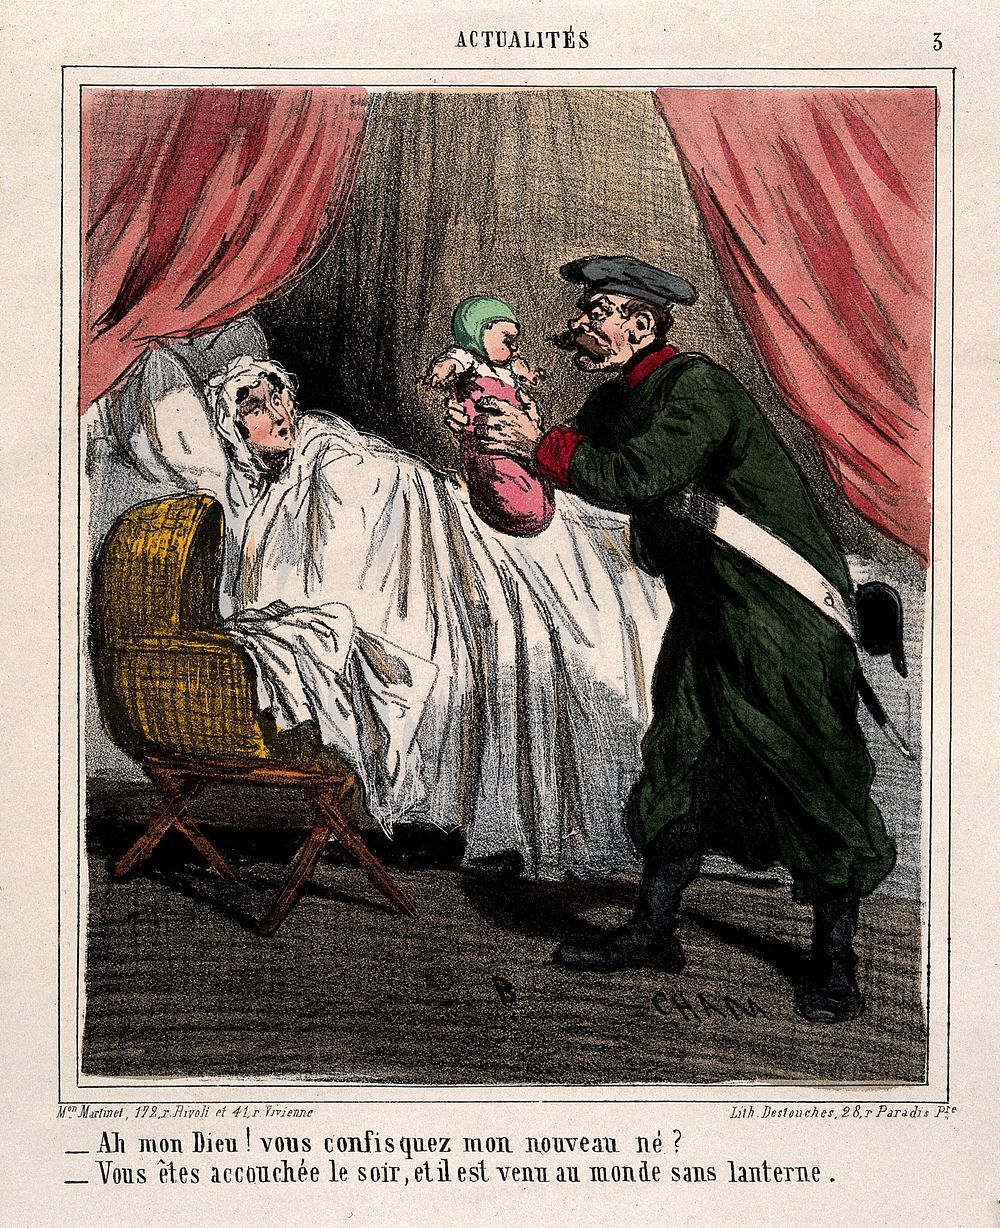 A soldier confiscates a baby from its mother in the night, because the baby has violated the curfew. Coloured lithograph by…